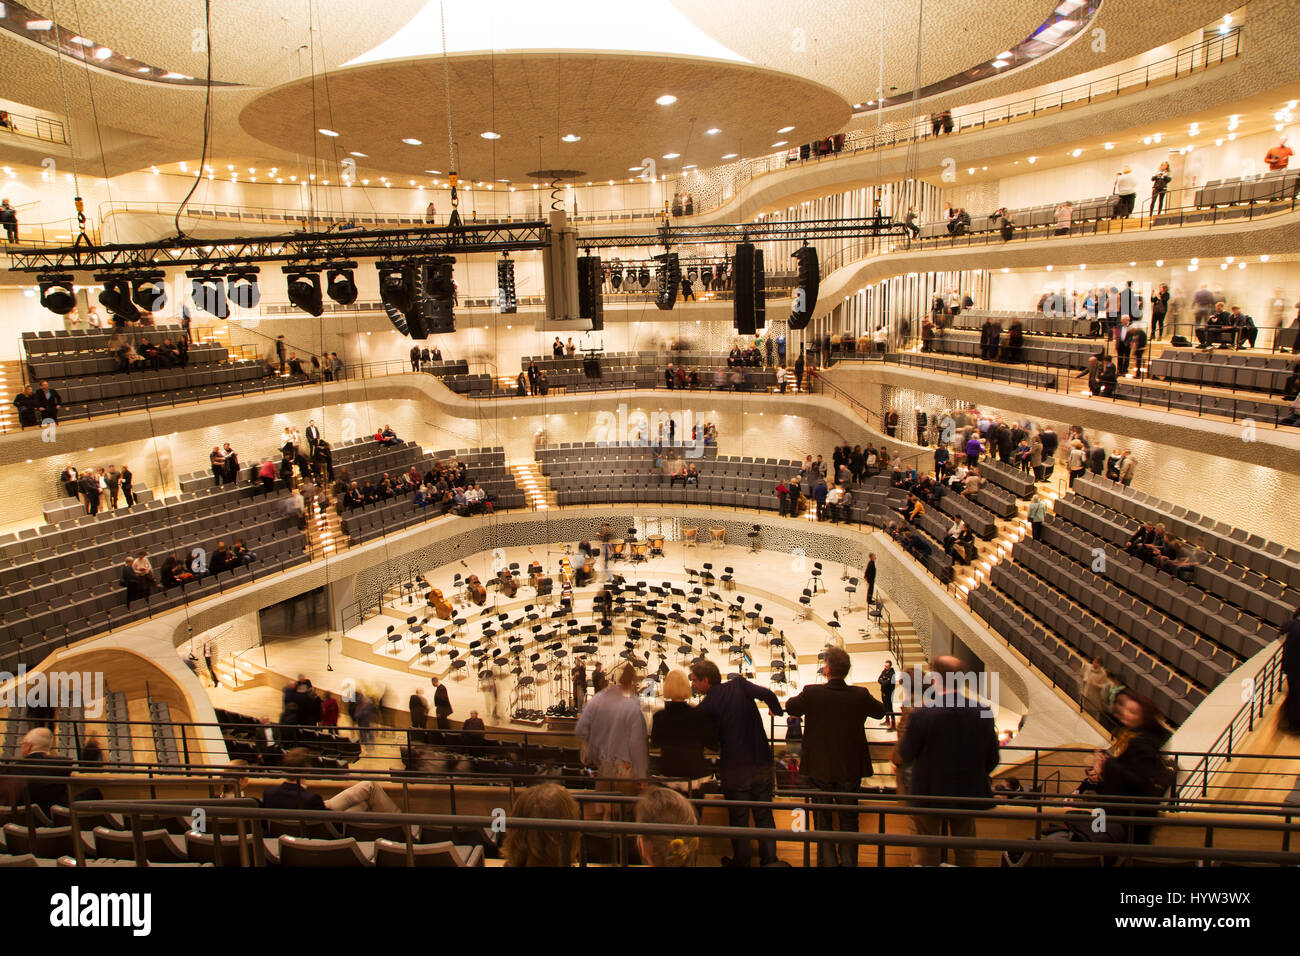 The concert hall within the Elbphilharmonie in Hamburg, Germany. The hall is highly regarded for the quality of its acoustics. Stock Photo